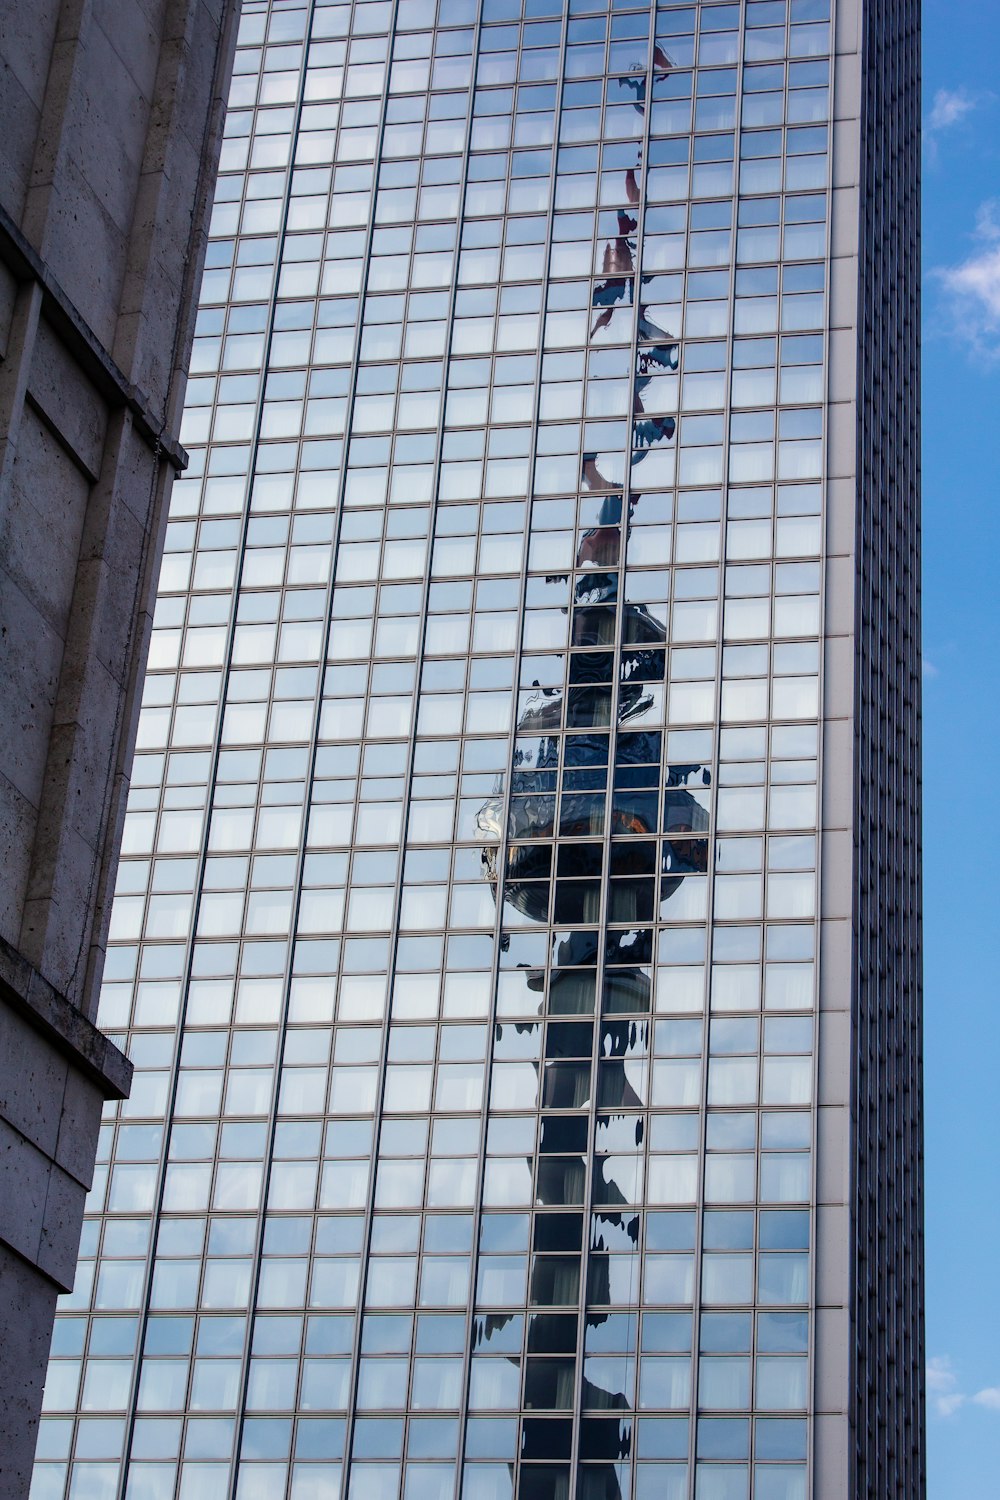 the reflection of a building in the glass windows of another building